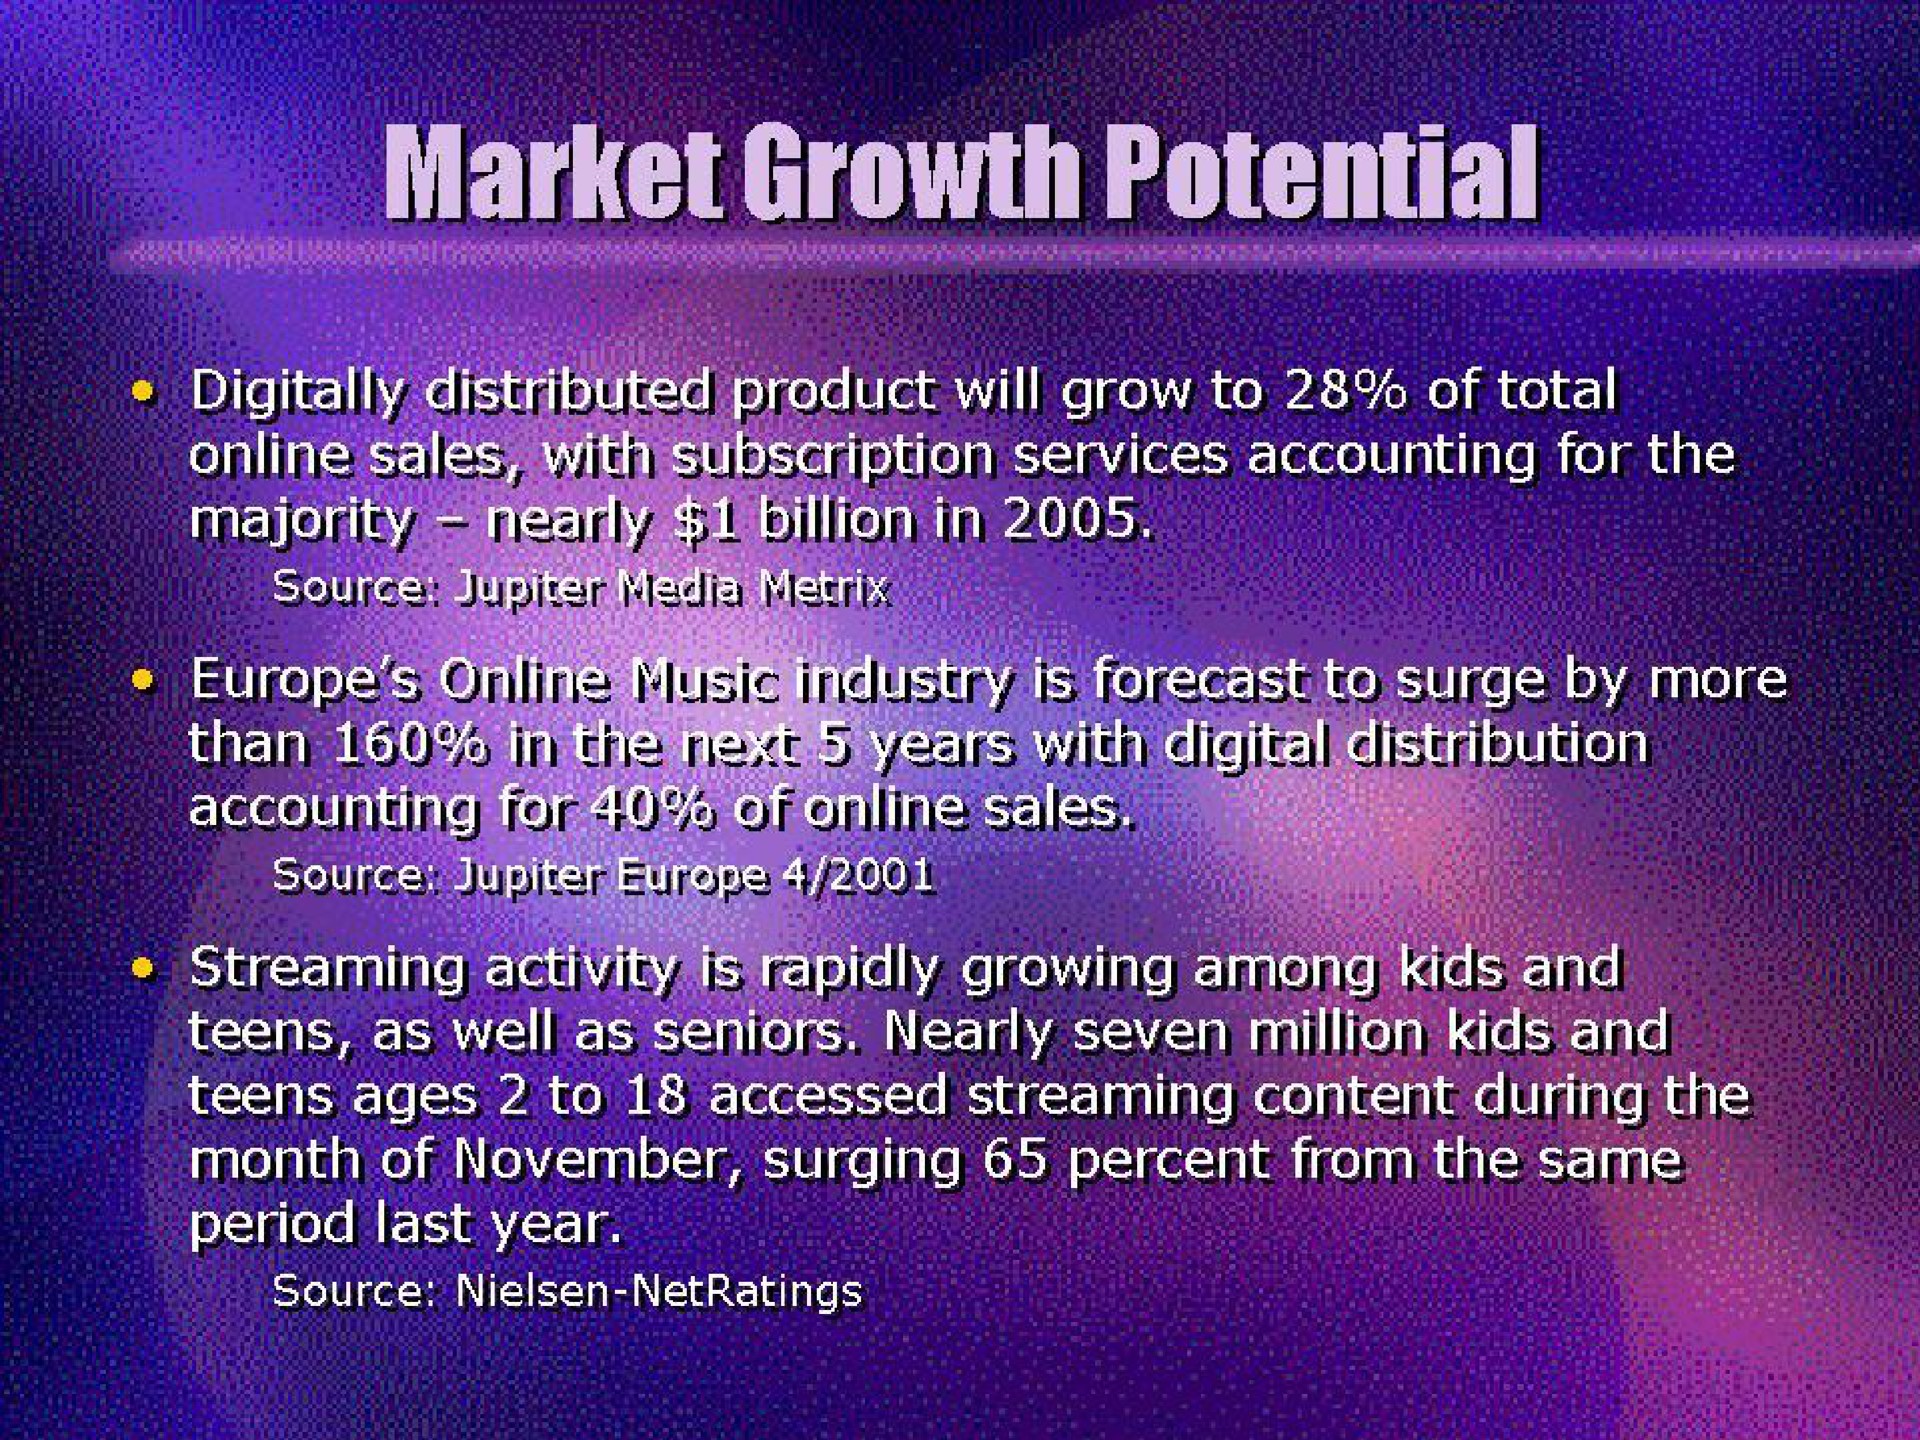 market to teens as on as seniors by million and teens ages to accessed streaming content during the month of surging percent from the period last year it see | Universal Music Group